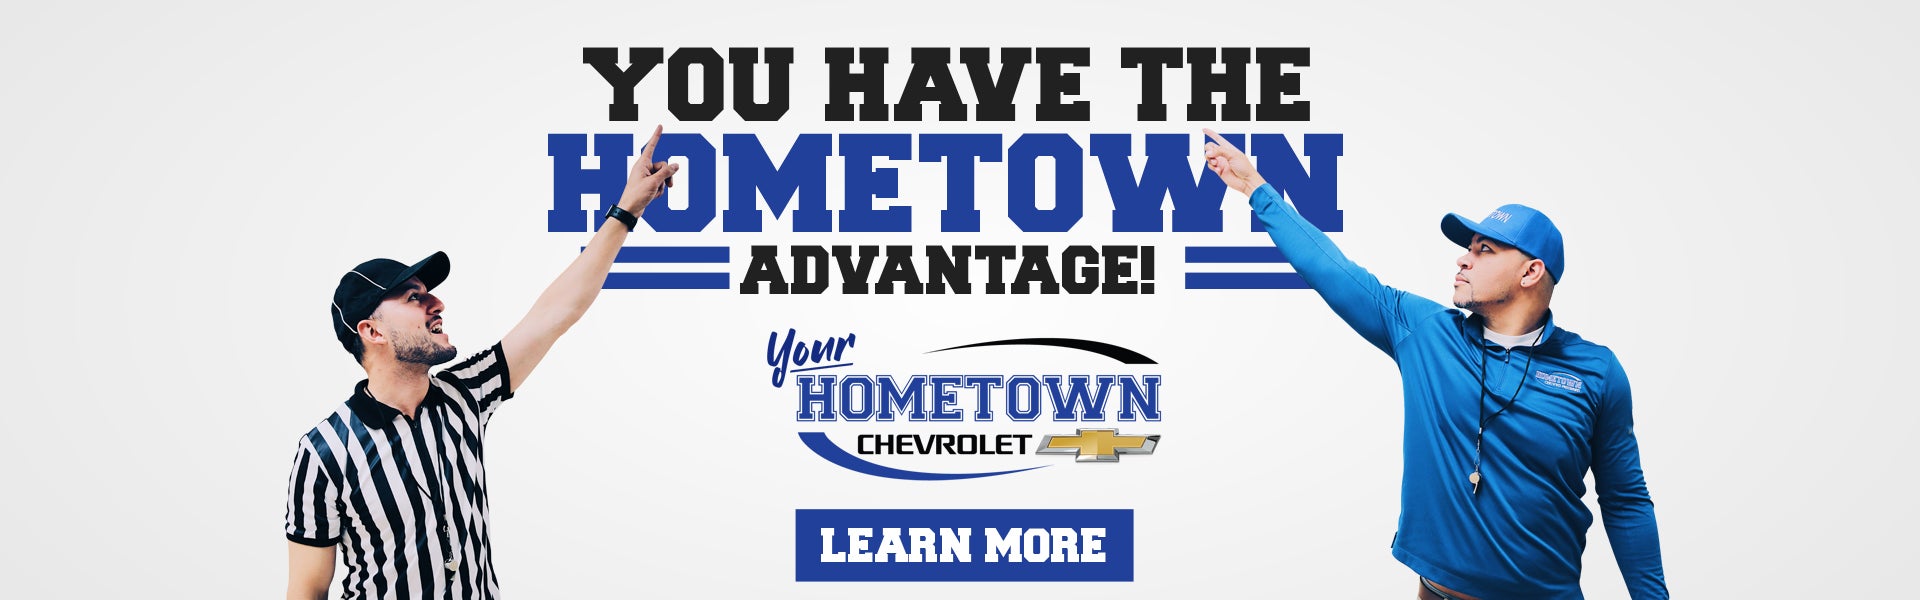 Order your new Chevrolet from Hometown Chevrolet in Chillicothe, Ohio!